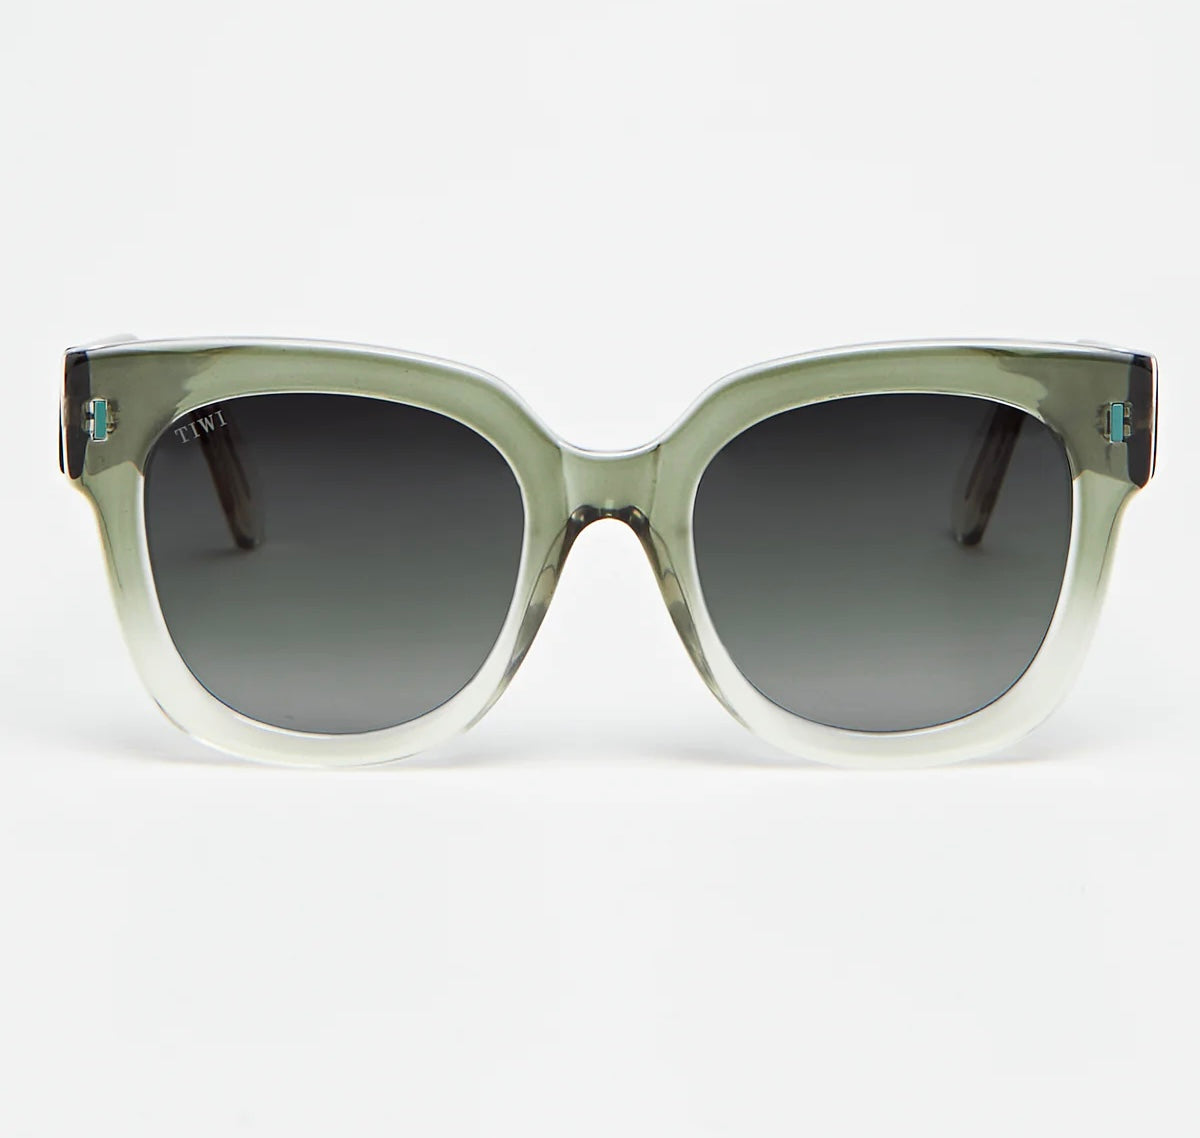 KERR Sunglasses Available in more colors Shiny Gradient Green  